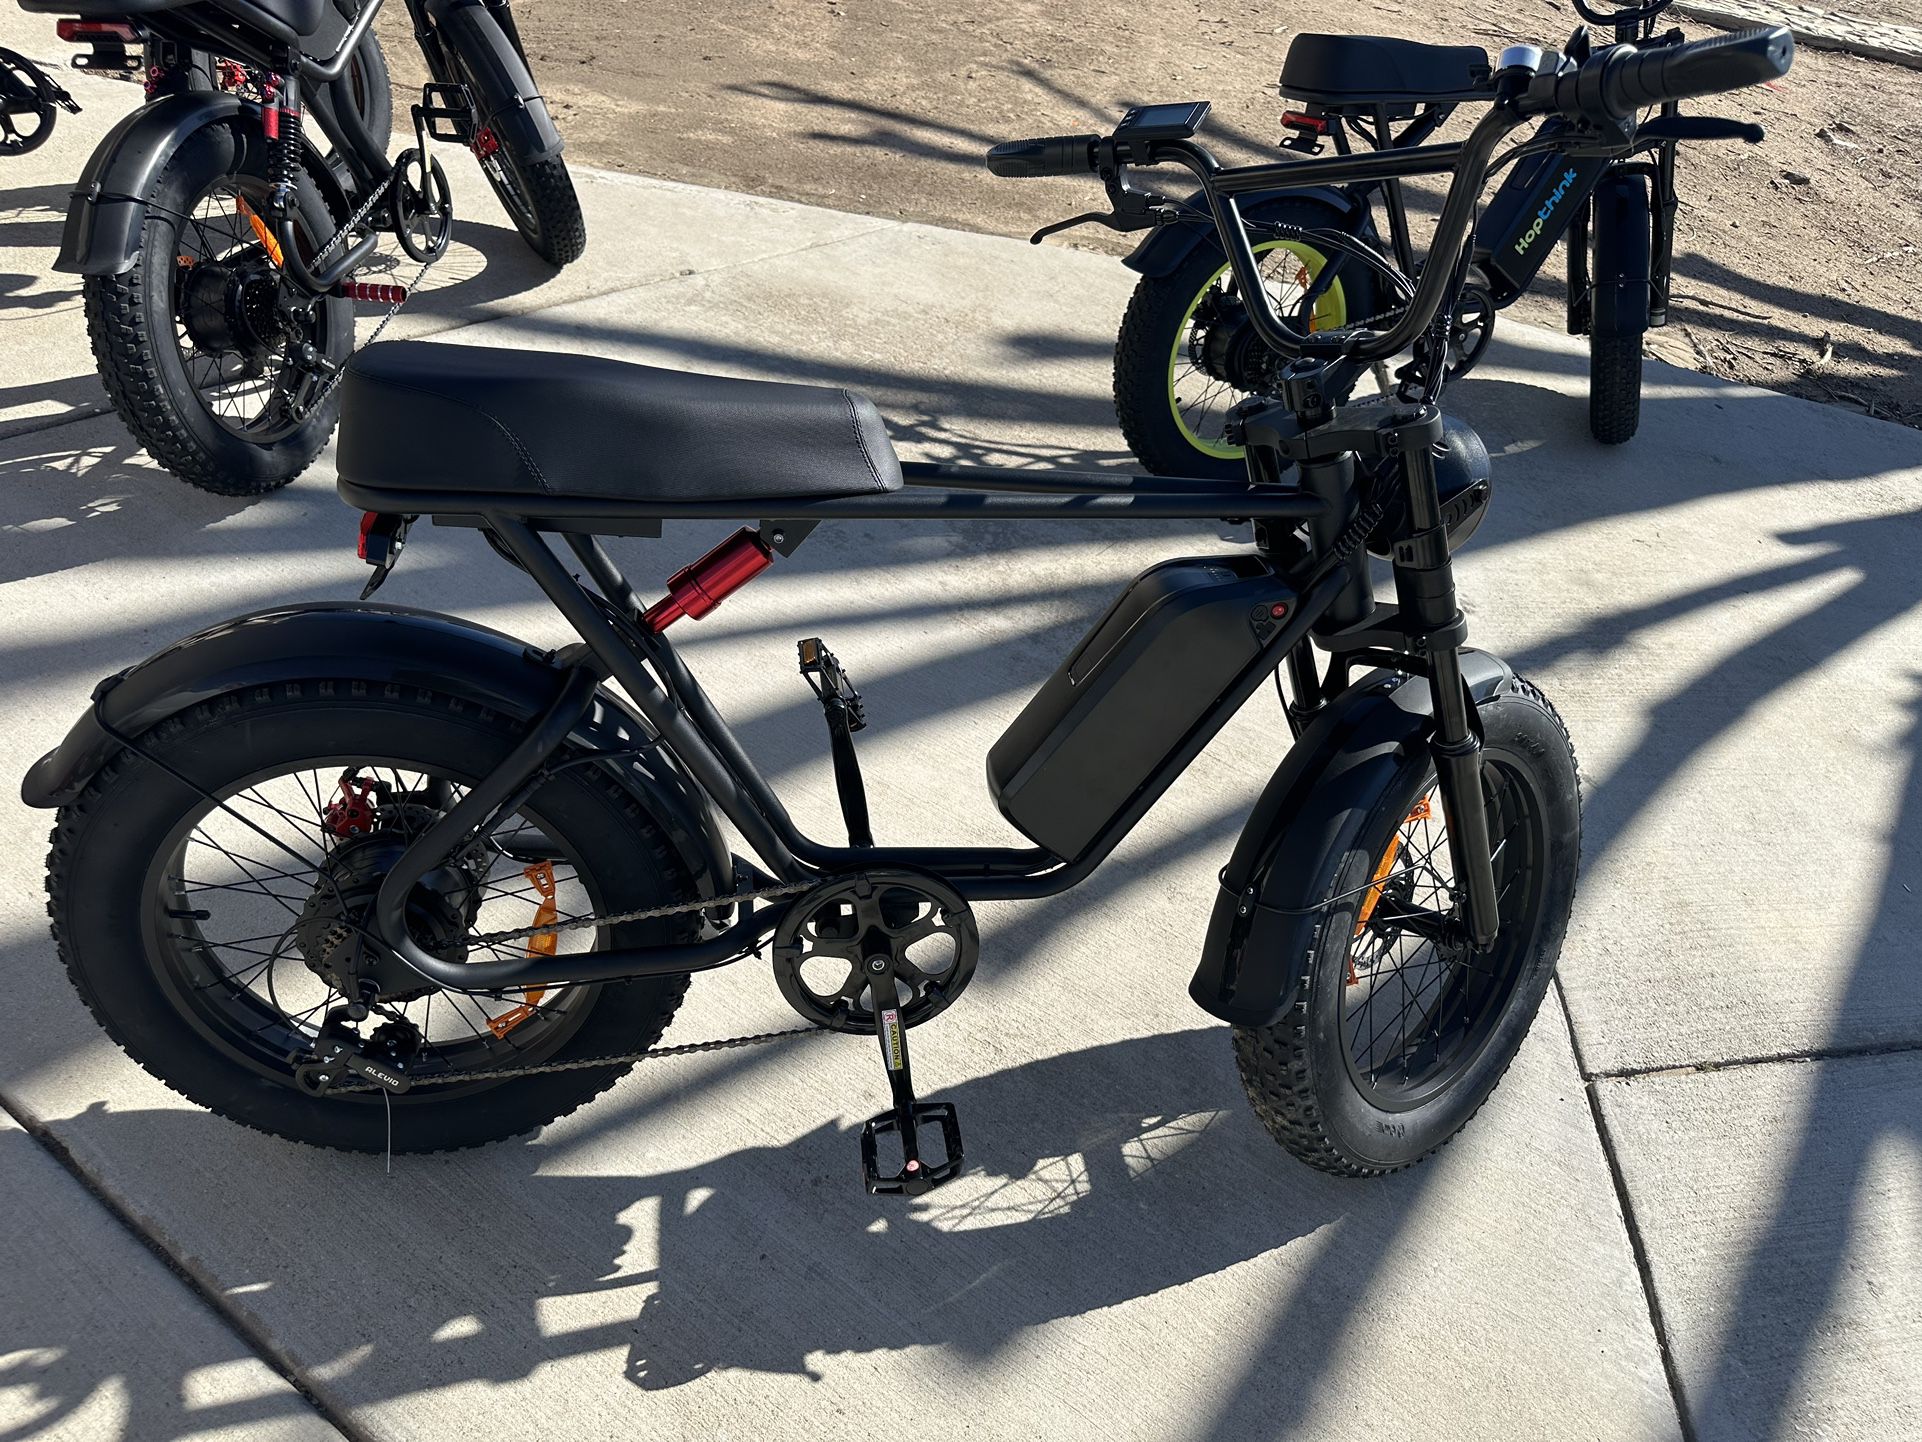 New 1000w E-bike With 20” Fat Tires. Head light And Brake Light. Off Road, Mountain And Street. 